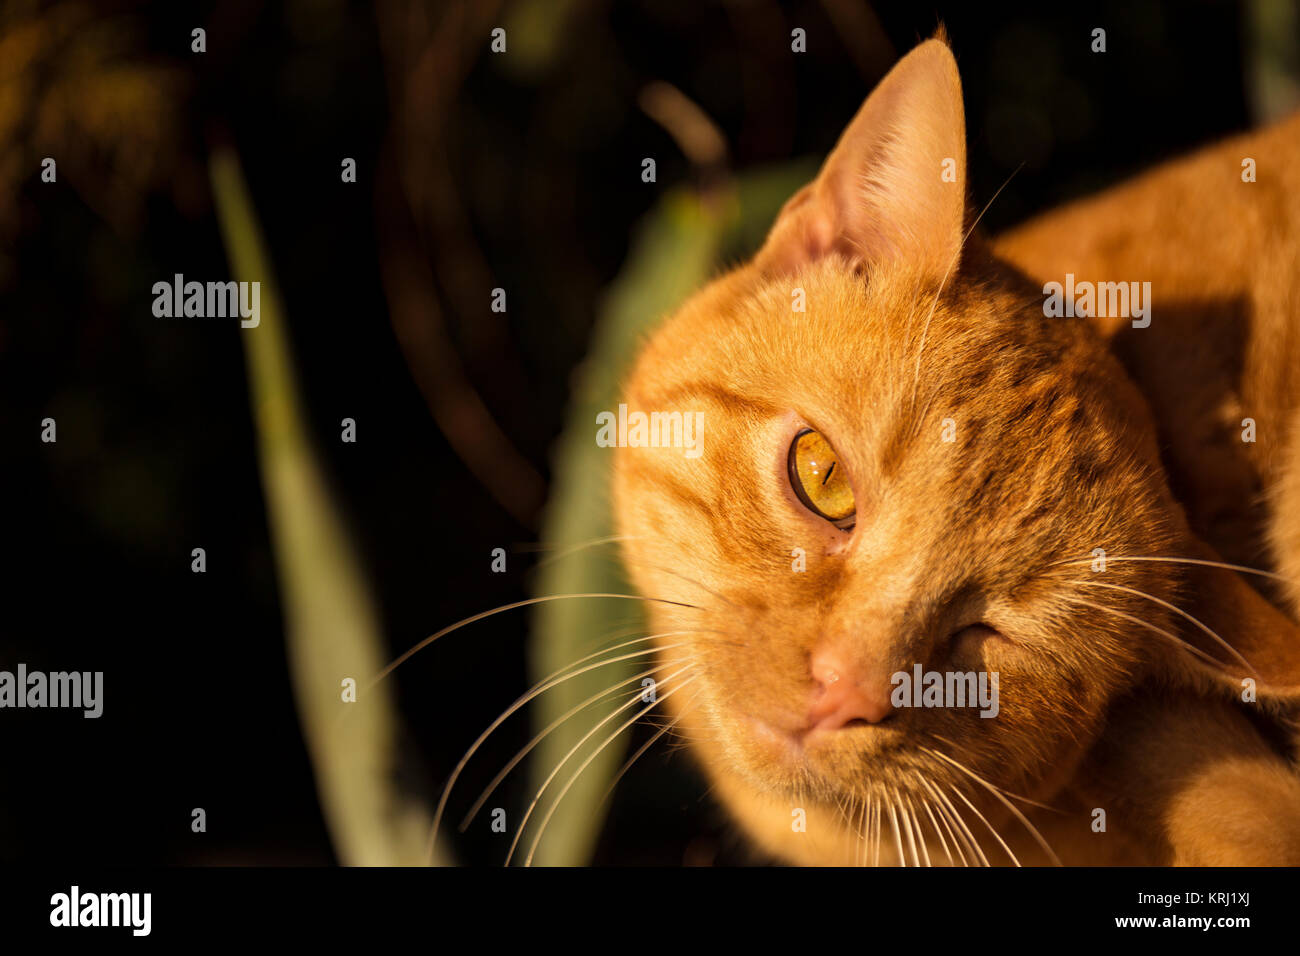 Cat Portrait with one eye closed. Stock Photo